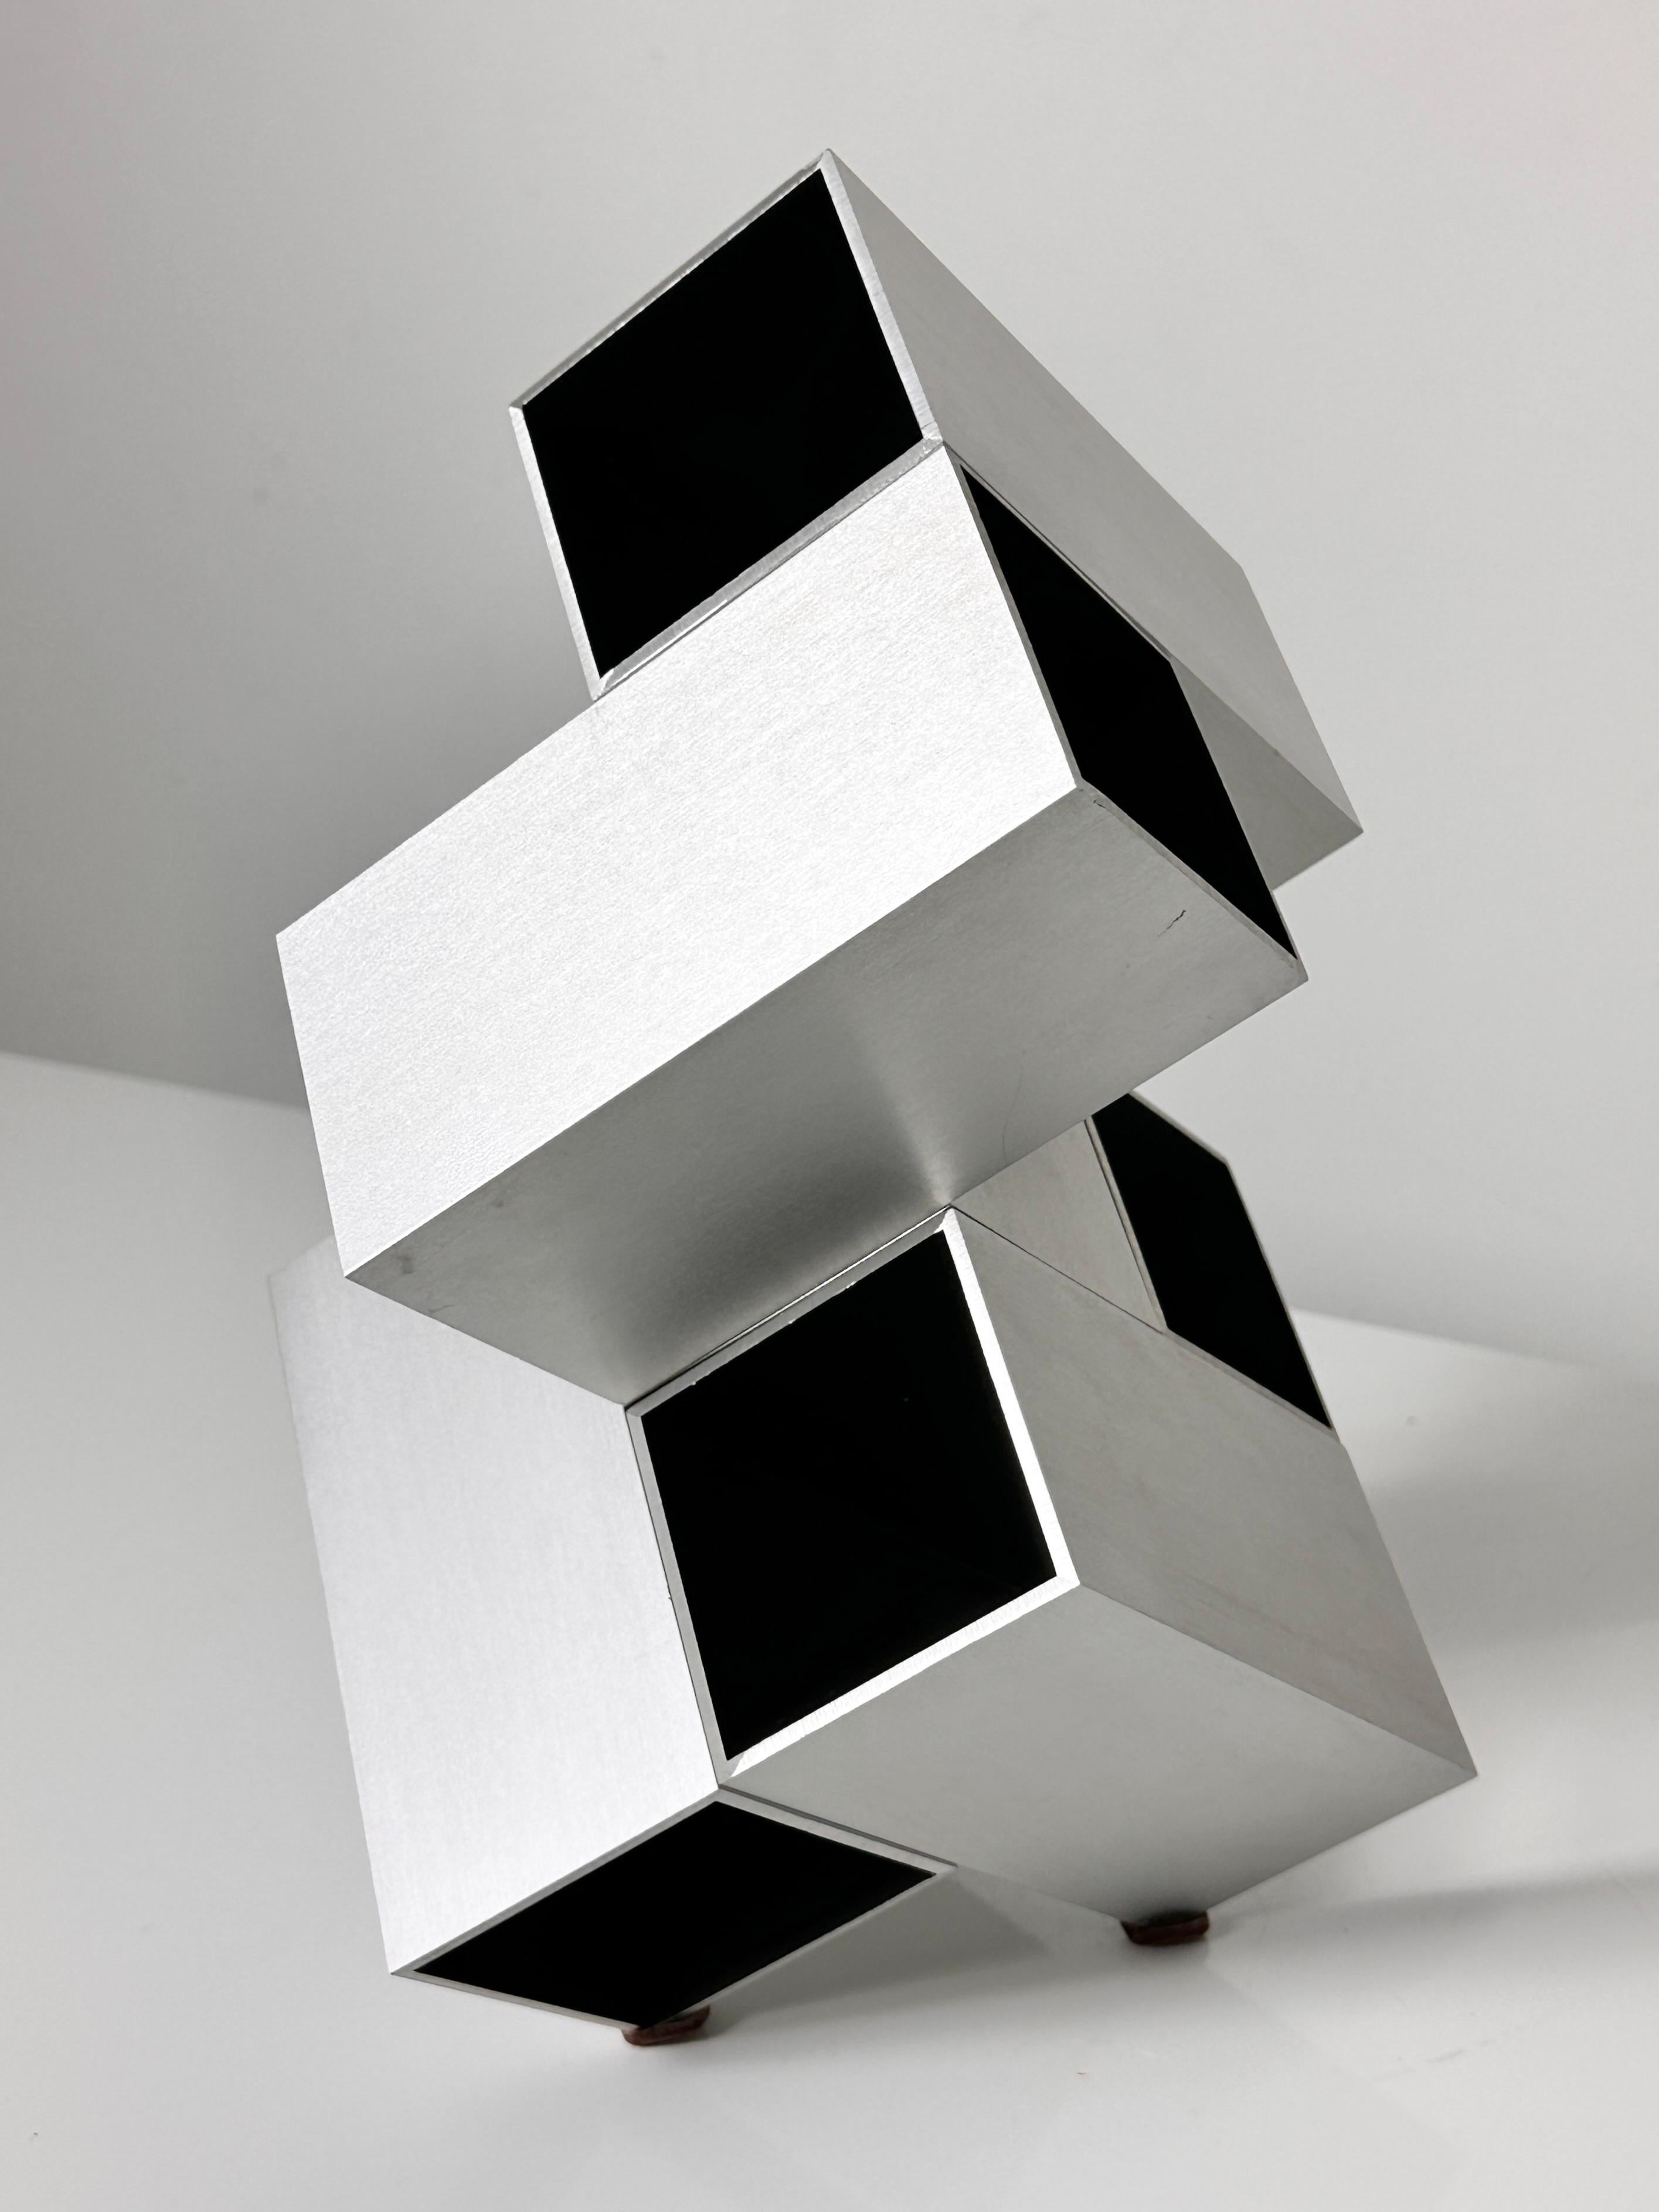 Modular Cube Sculpture by Kosso Eloul Israeli Artist 1920-1995 Toronto Canada  For Sale 2